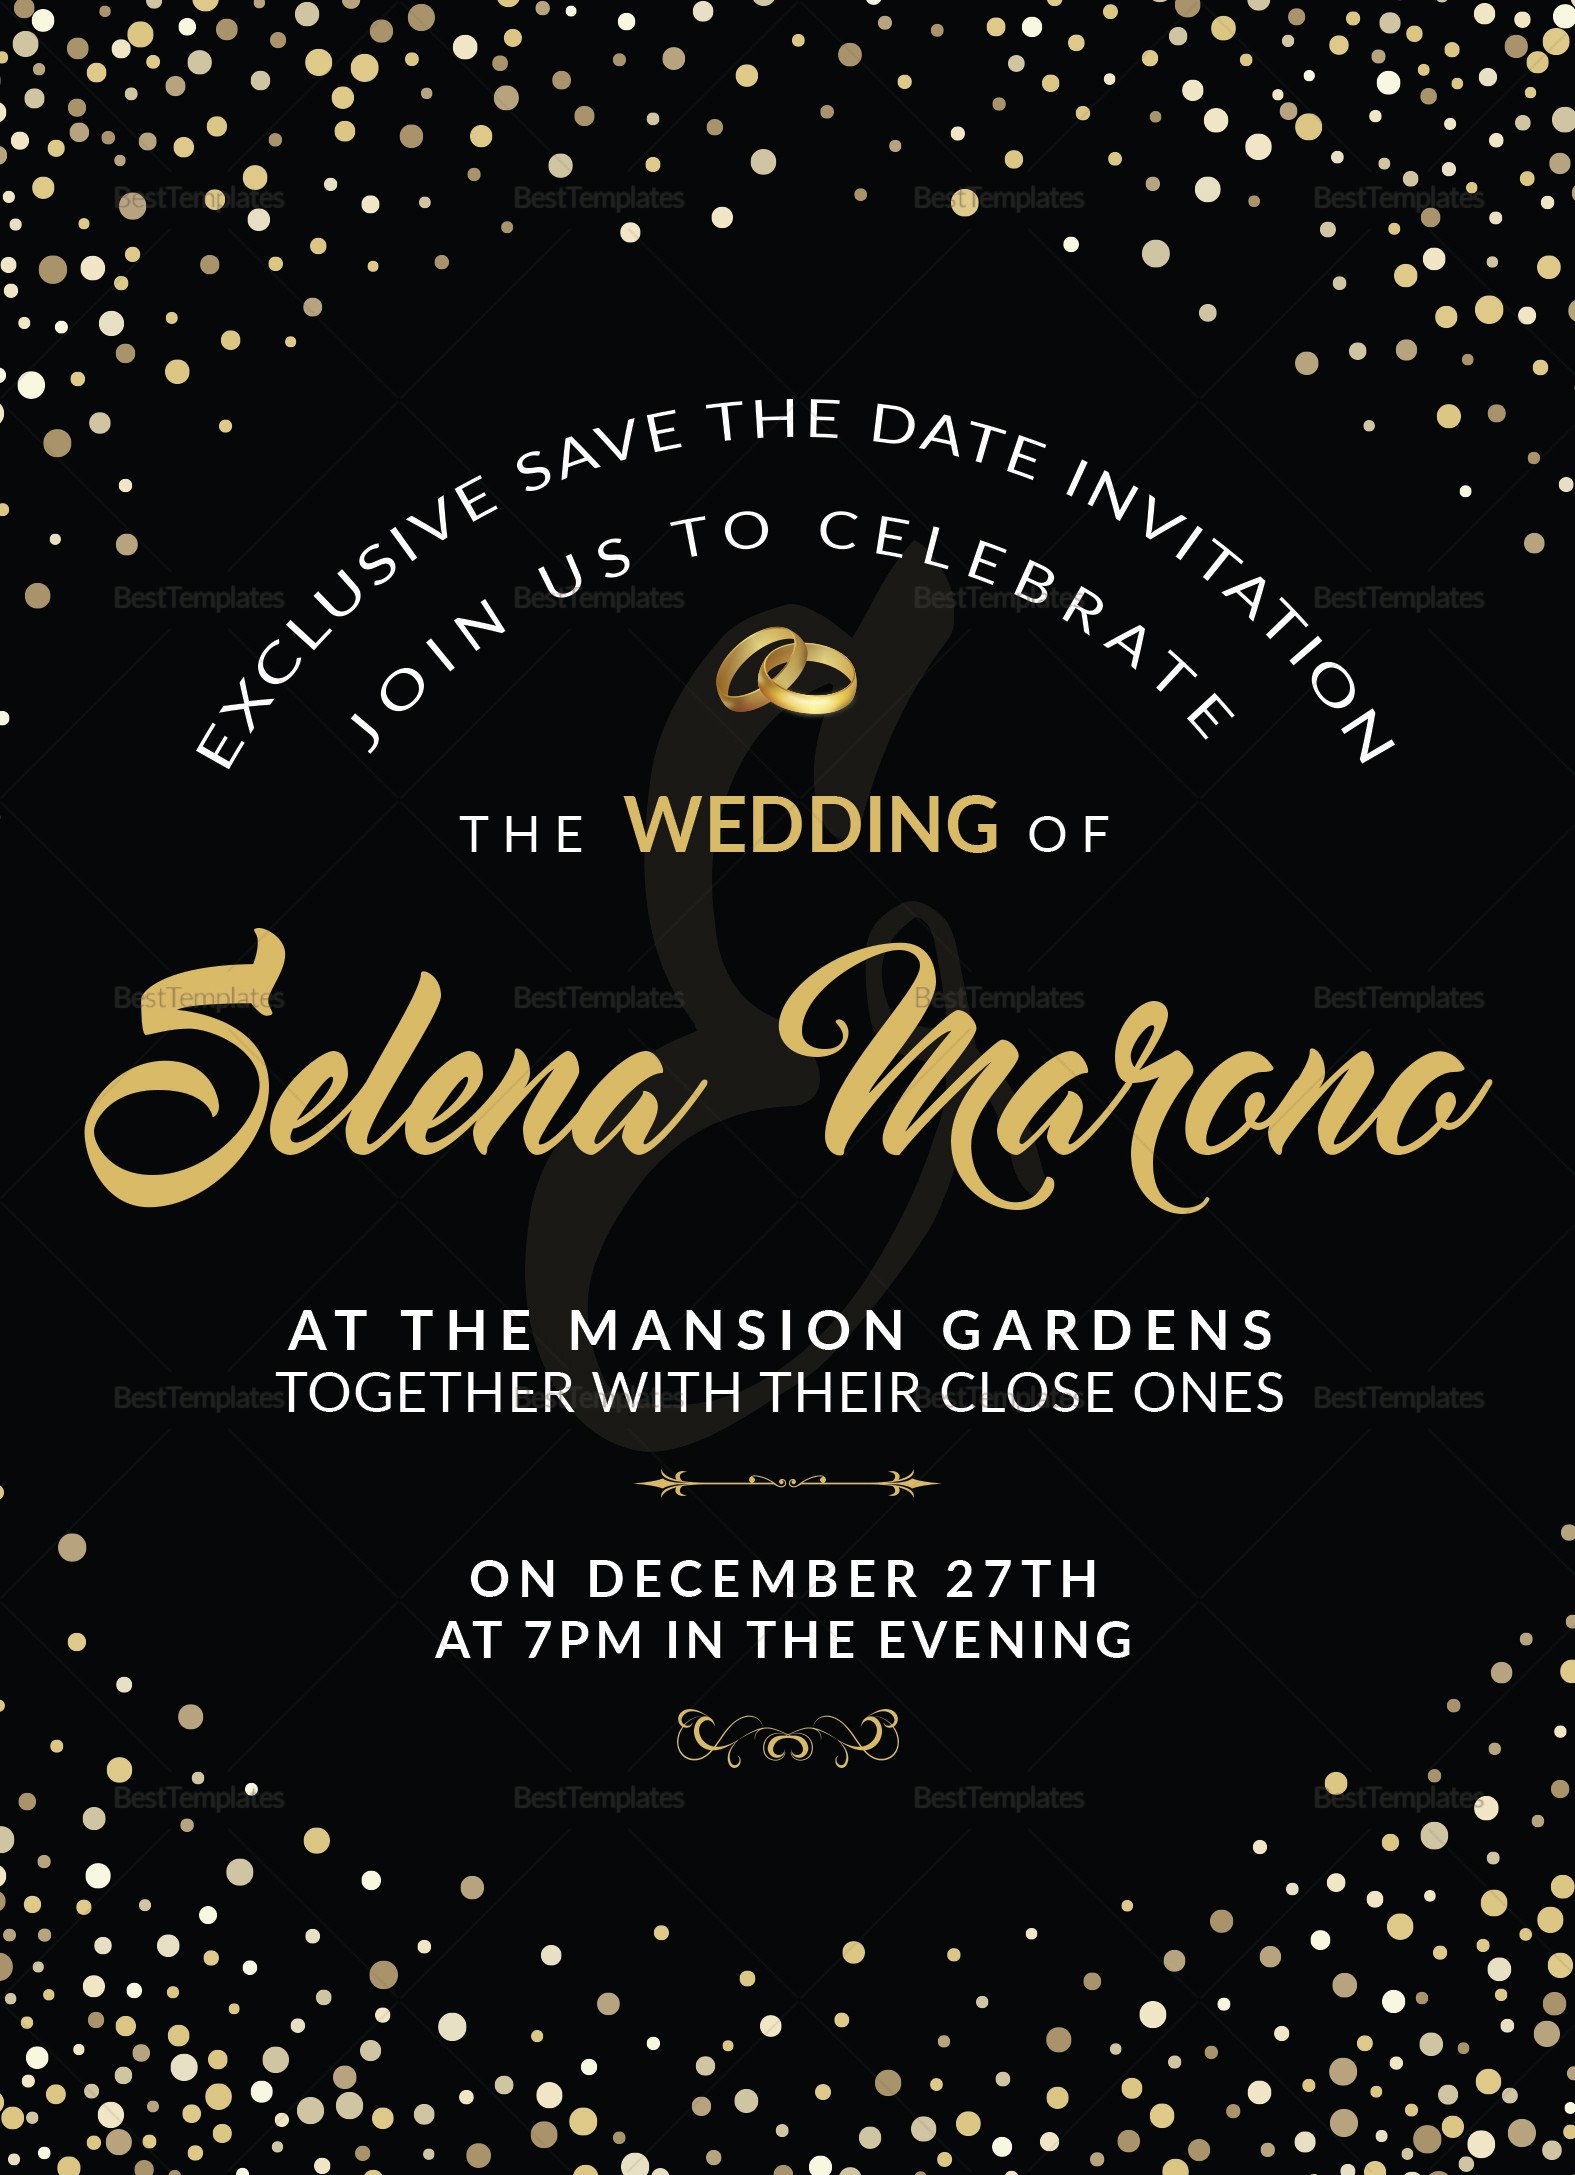 Black and Gold Wedding Invitation Card Design Template in